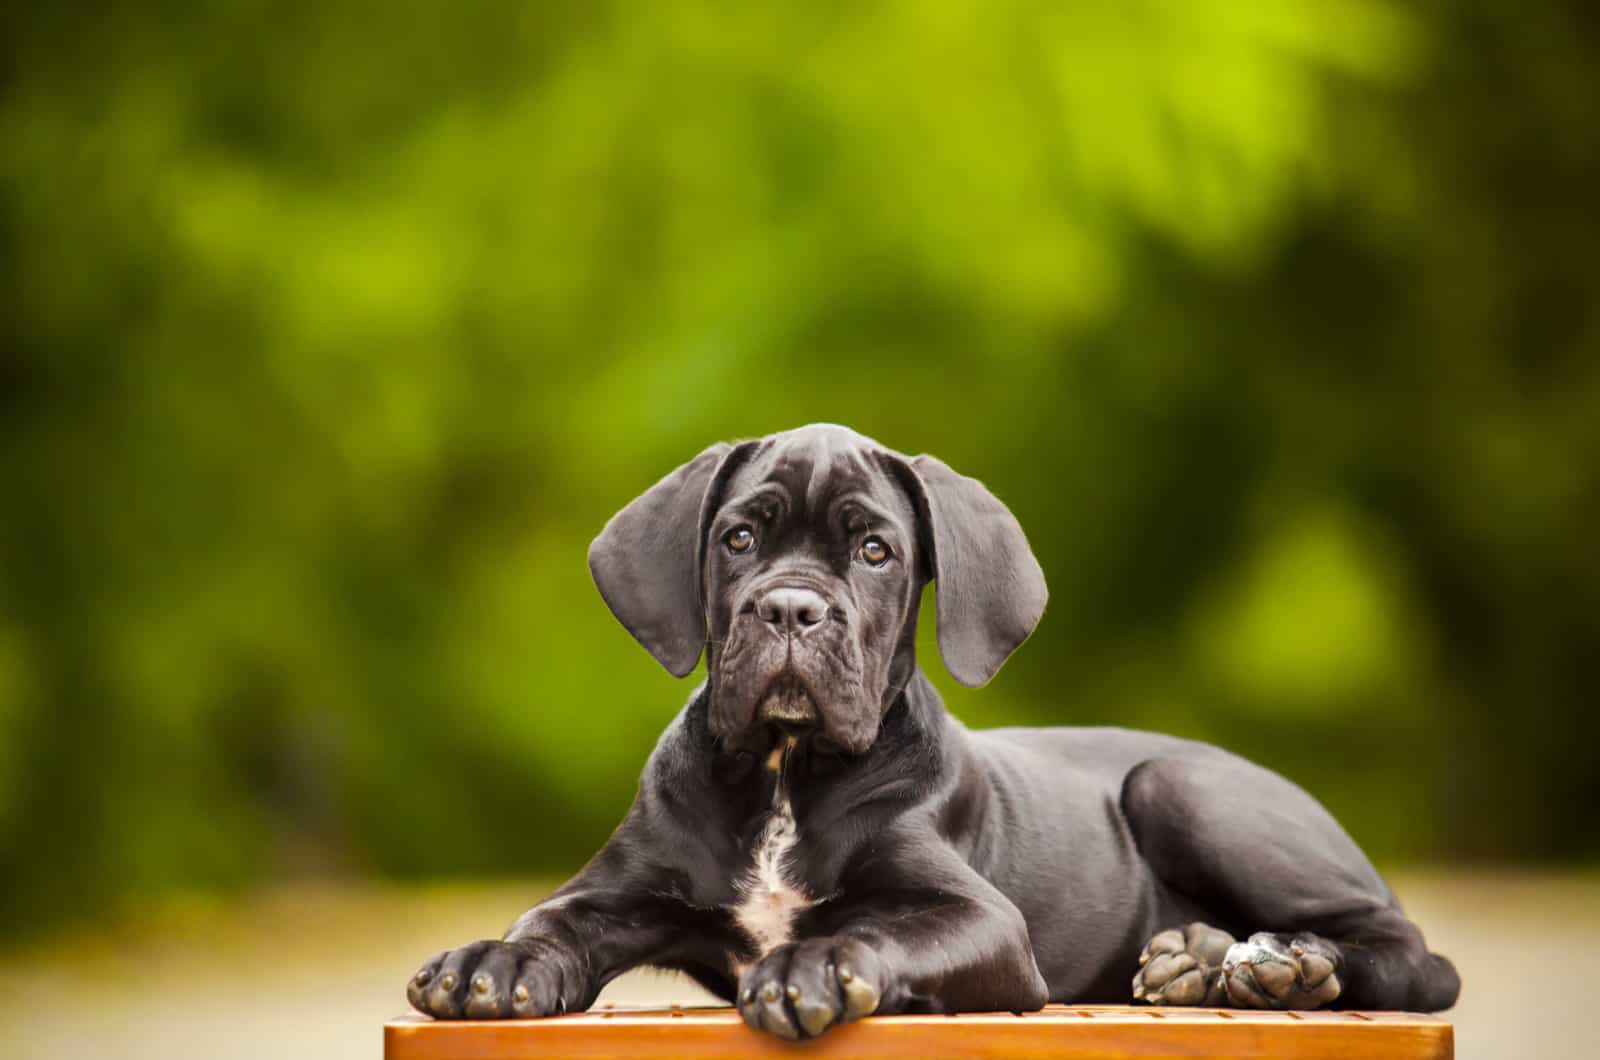 cane corso puppy posing against green background